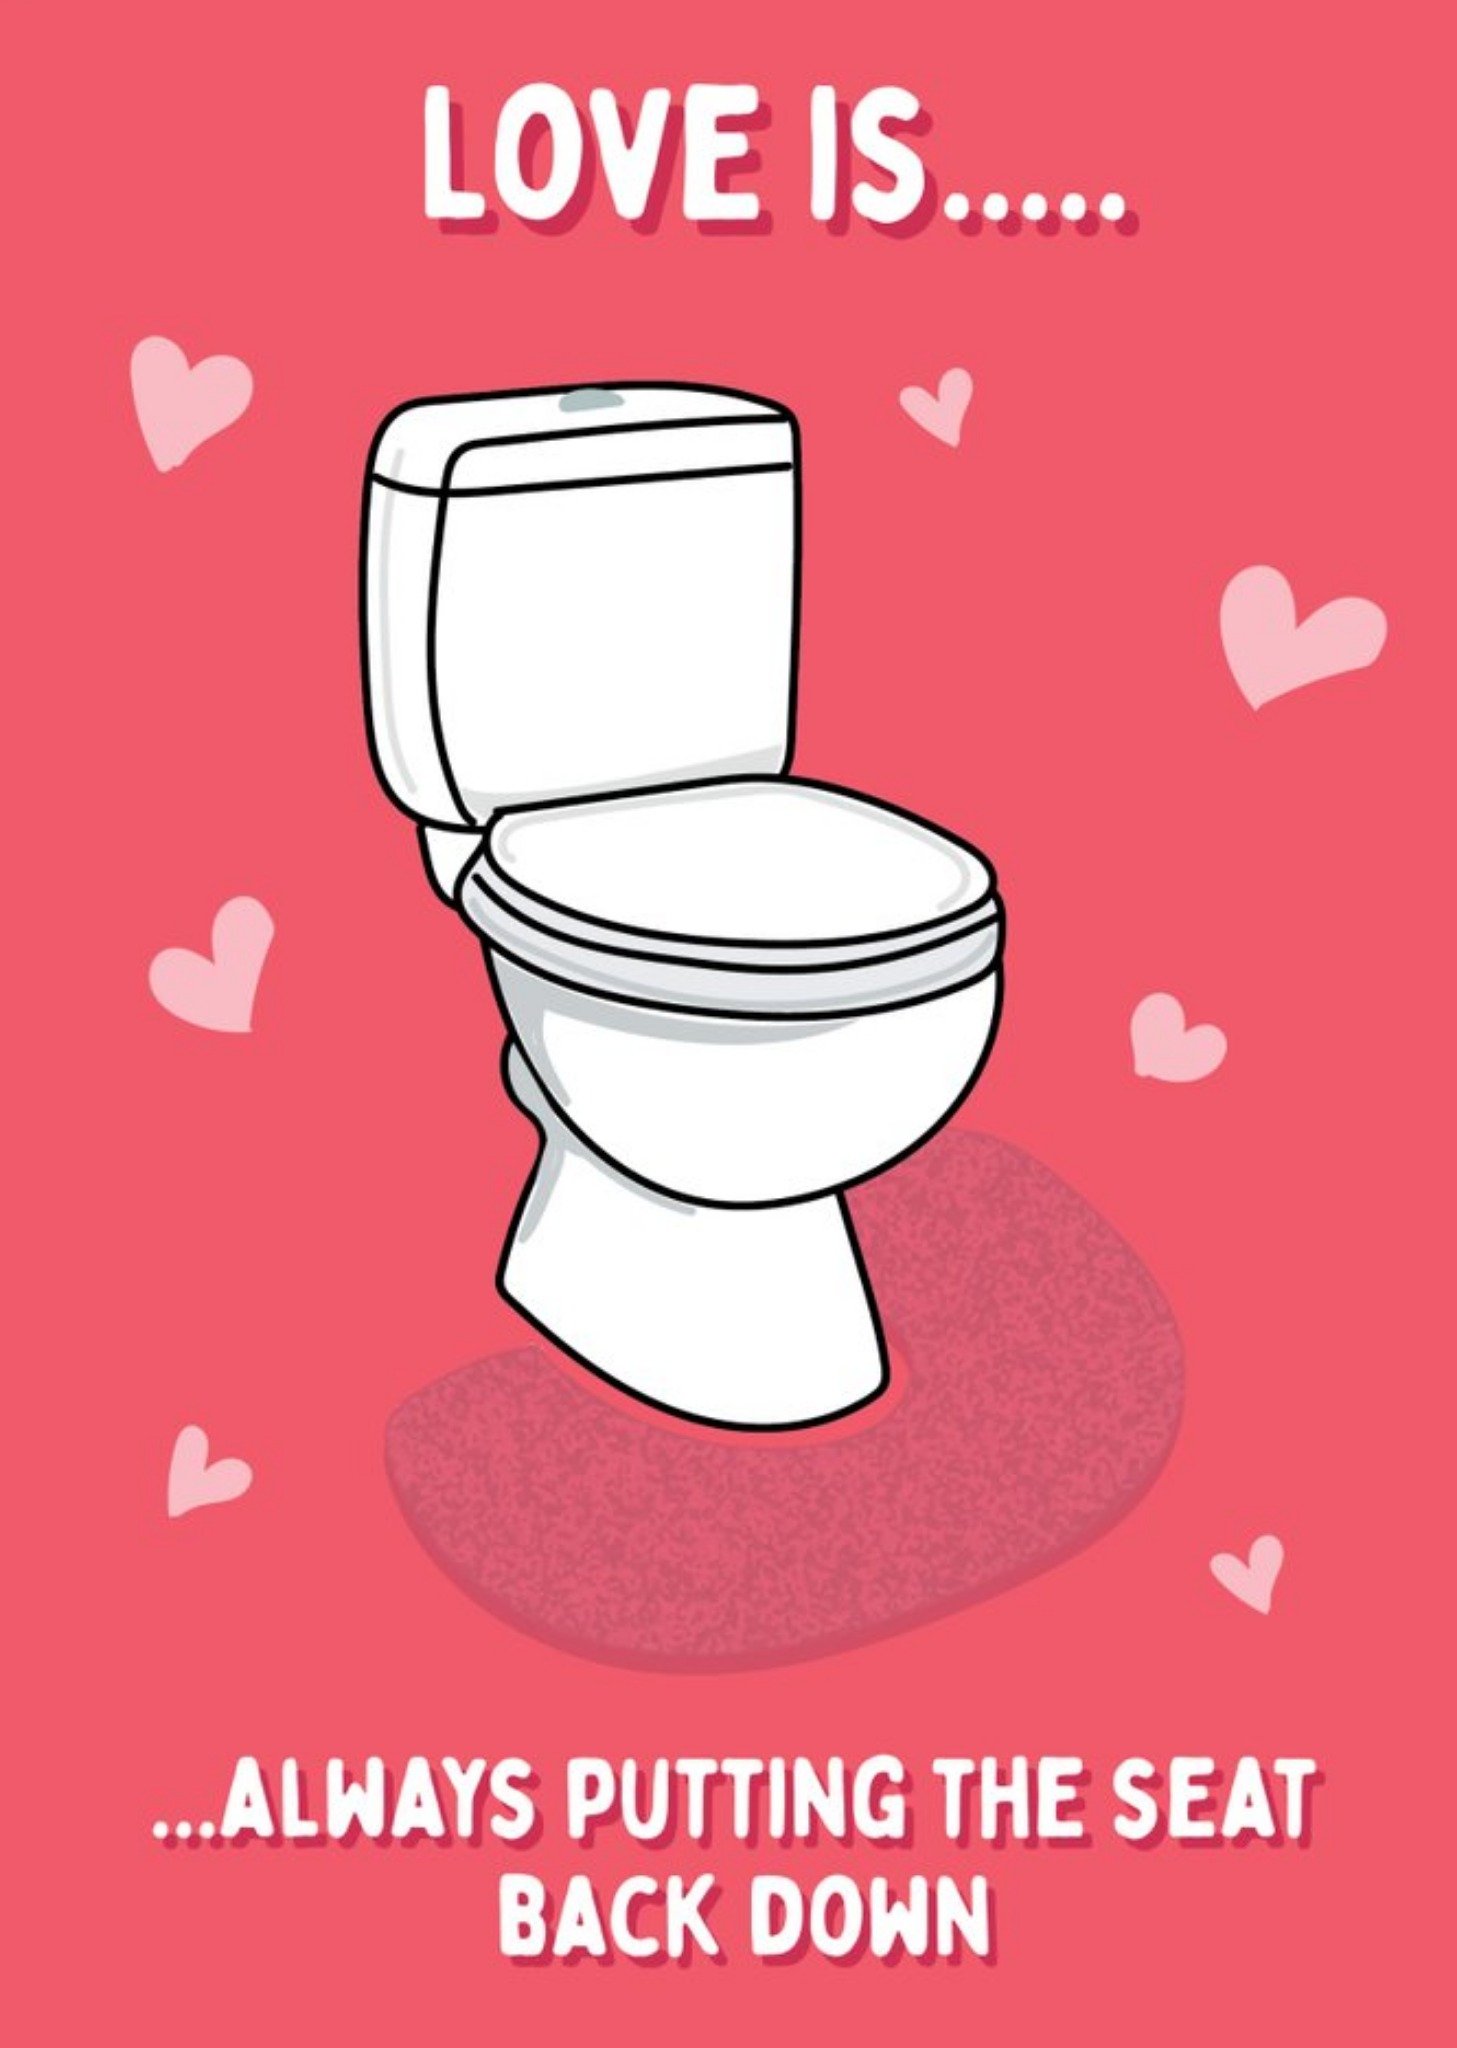 Moonpig Illustration Of A Toilet Love Is Always Putting The Seat Back Down Valentines Day Card Ecard